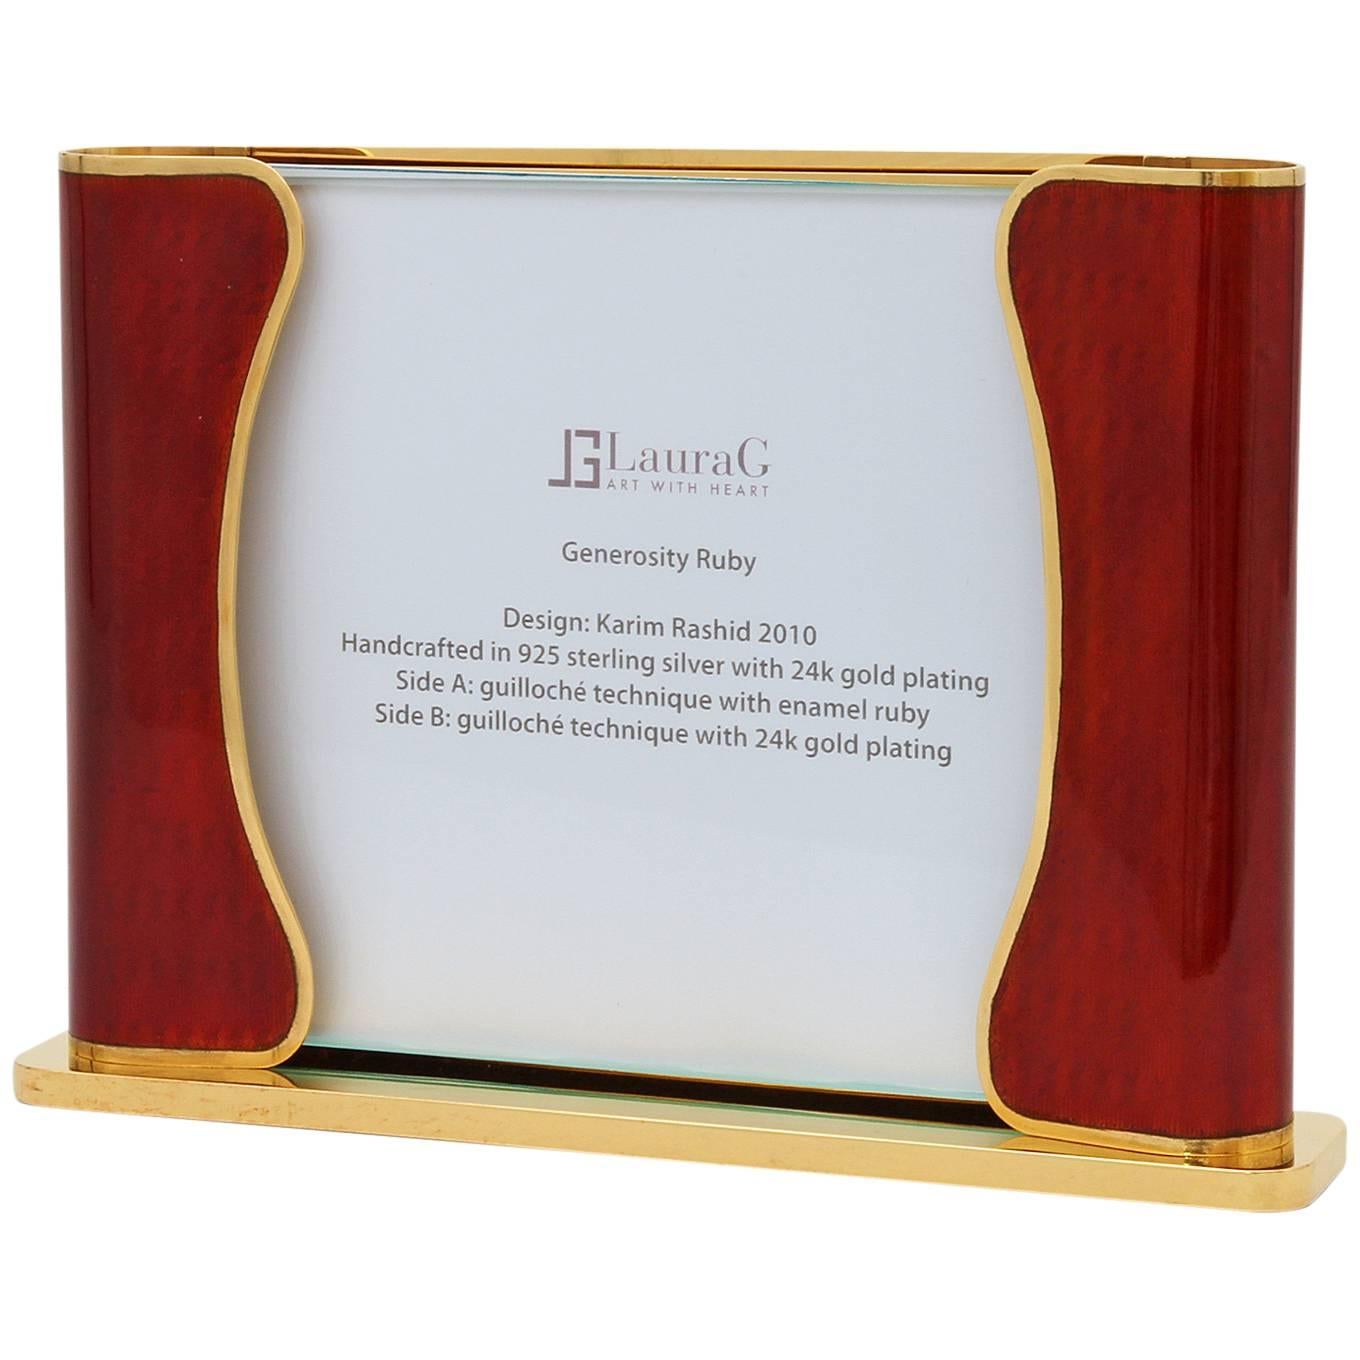 Generosity Ruby is a unique golden silver handcrafted photo frame in Art Deco style of the collection Laura G Art with Heart from Italy.
A collectible design piece for your precious memories of heart.
The piloto frame  is recto-verso, that means